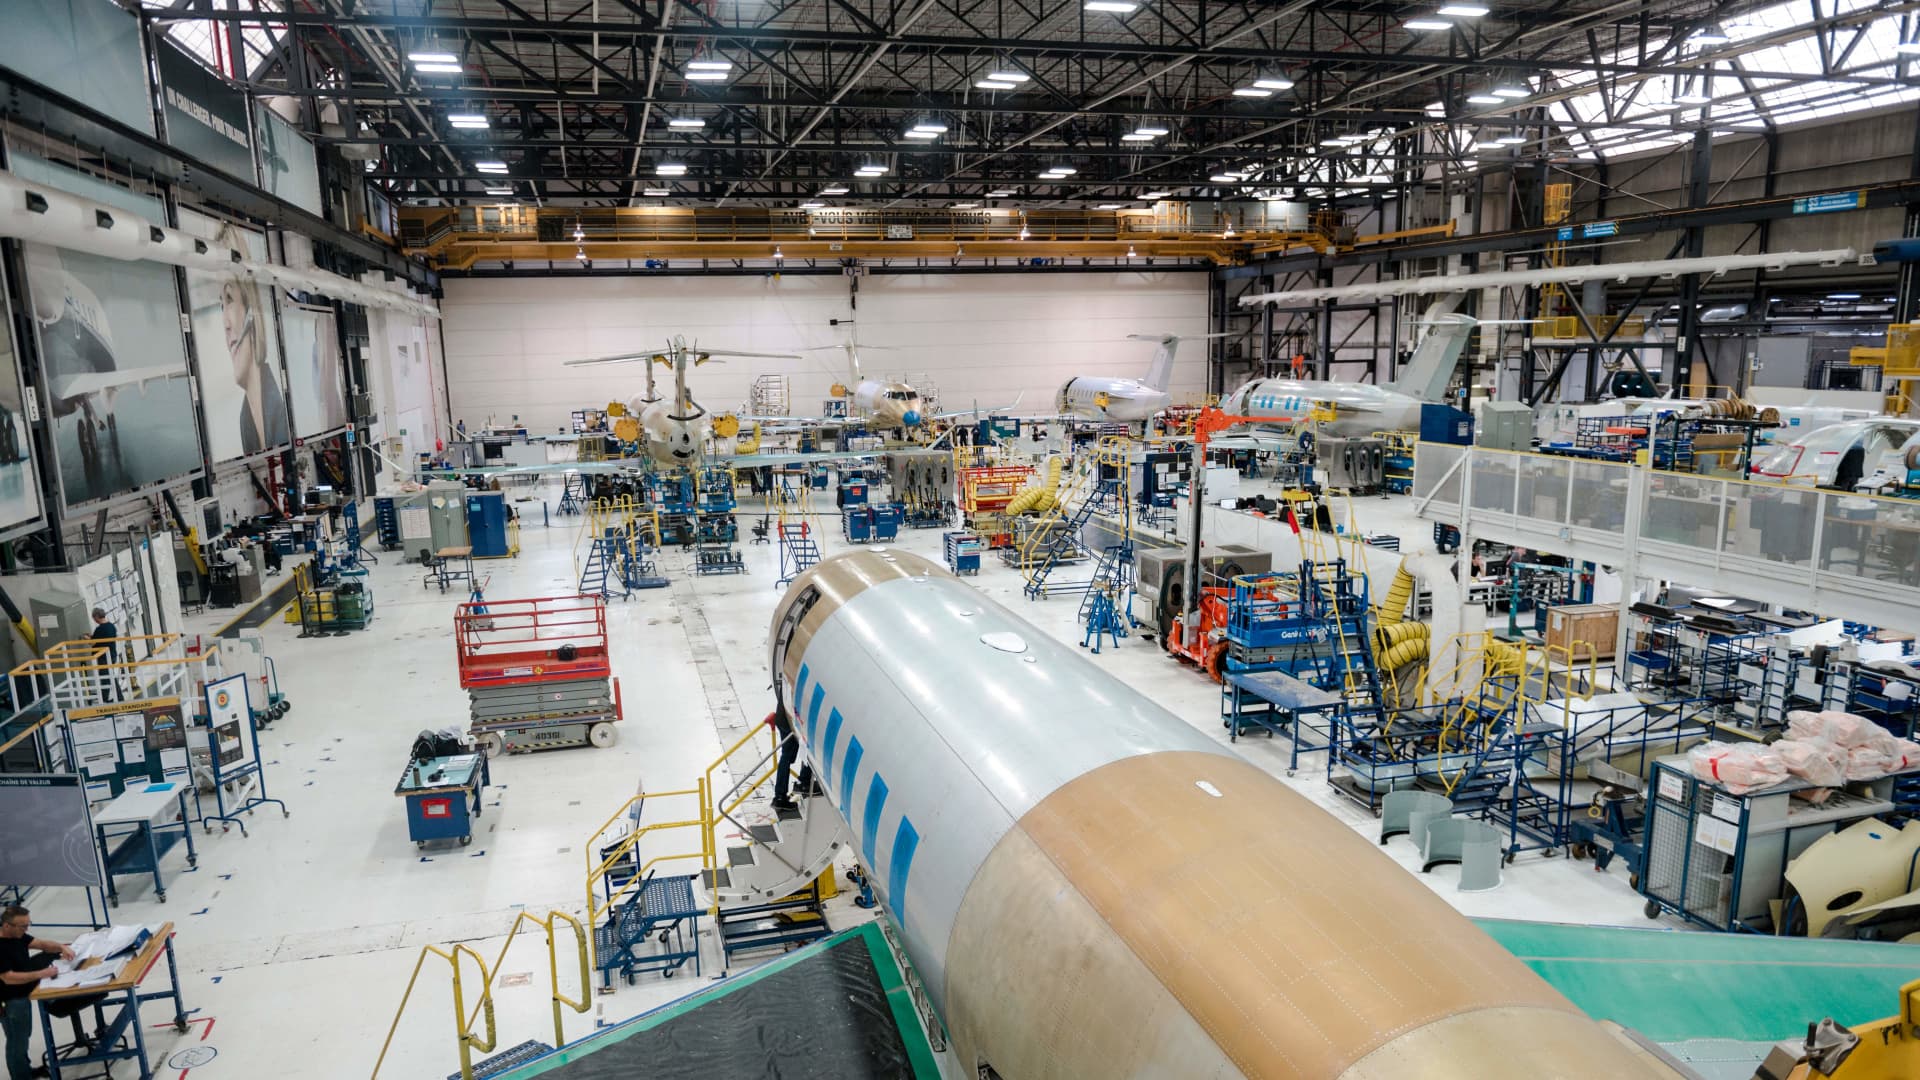 Aircraft are assembled at the Bombardier Challenger Assembly Hall during Bombardier's 2023 Investor Day on March 23, 2023, in Dorval, Quebec, Canada. (Photo by ANDREJ IVANOV / AFP) (Photo by ANDREJ IVANOV/AFP via Getty Images)